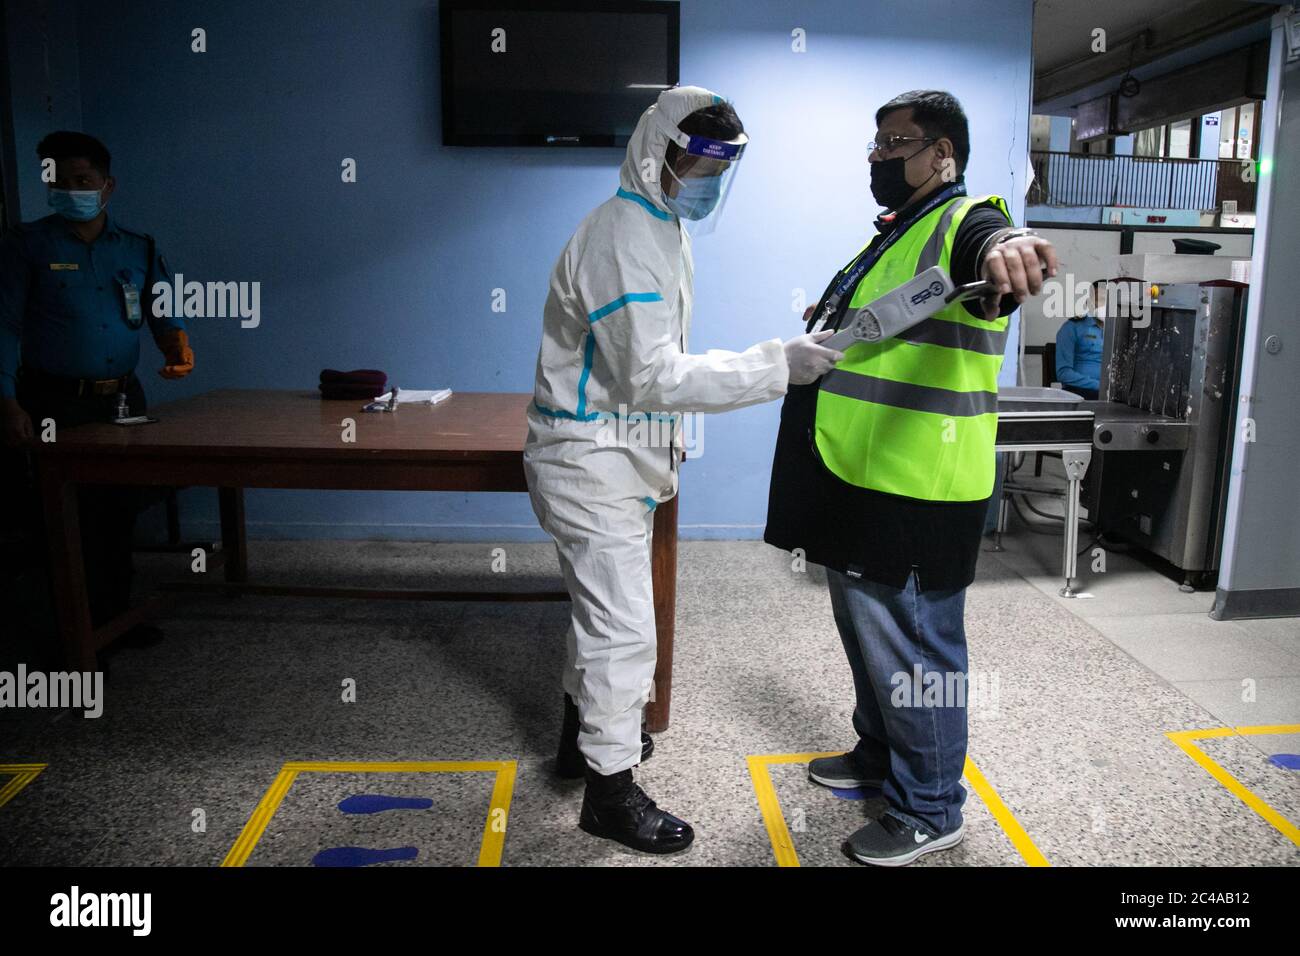 A security person wearing protective gear searches a passenger at Tribhuvan International airport during a mock safety drill to make necessary preparations for the resumption of domestic and international flights.Commercial flights to Nepal have been suspended since March 26th due to the risk of coronavirus infection. The government is preparing to open commercial flights as the risk of infection decreases. Stock Photo